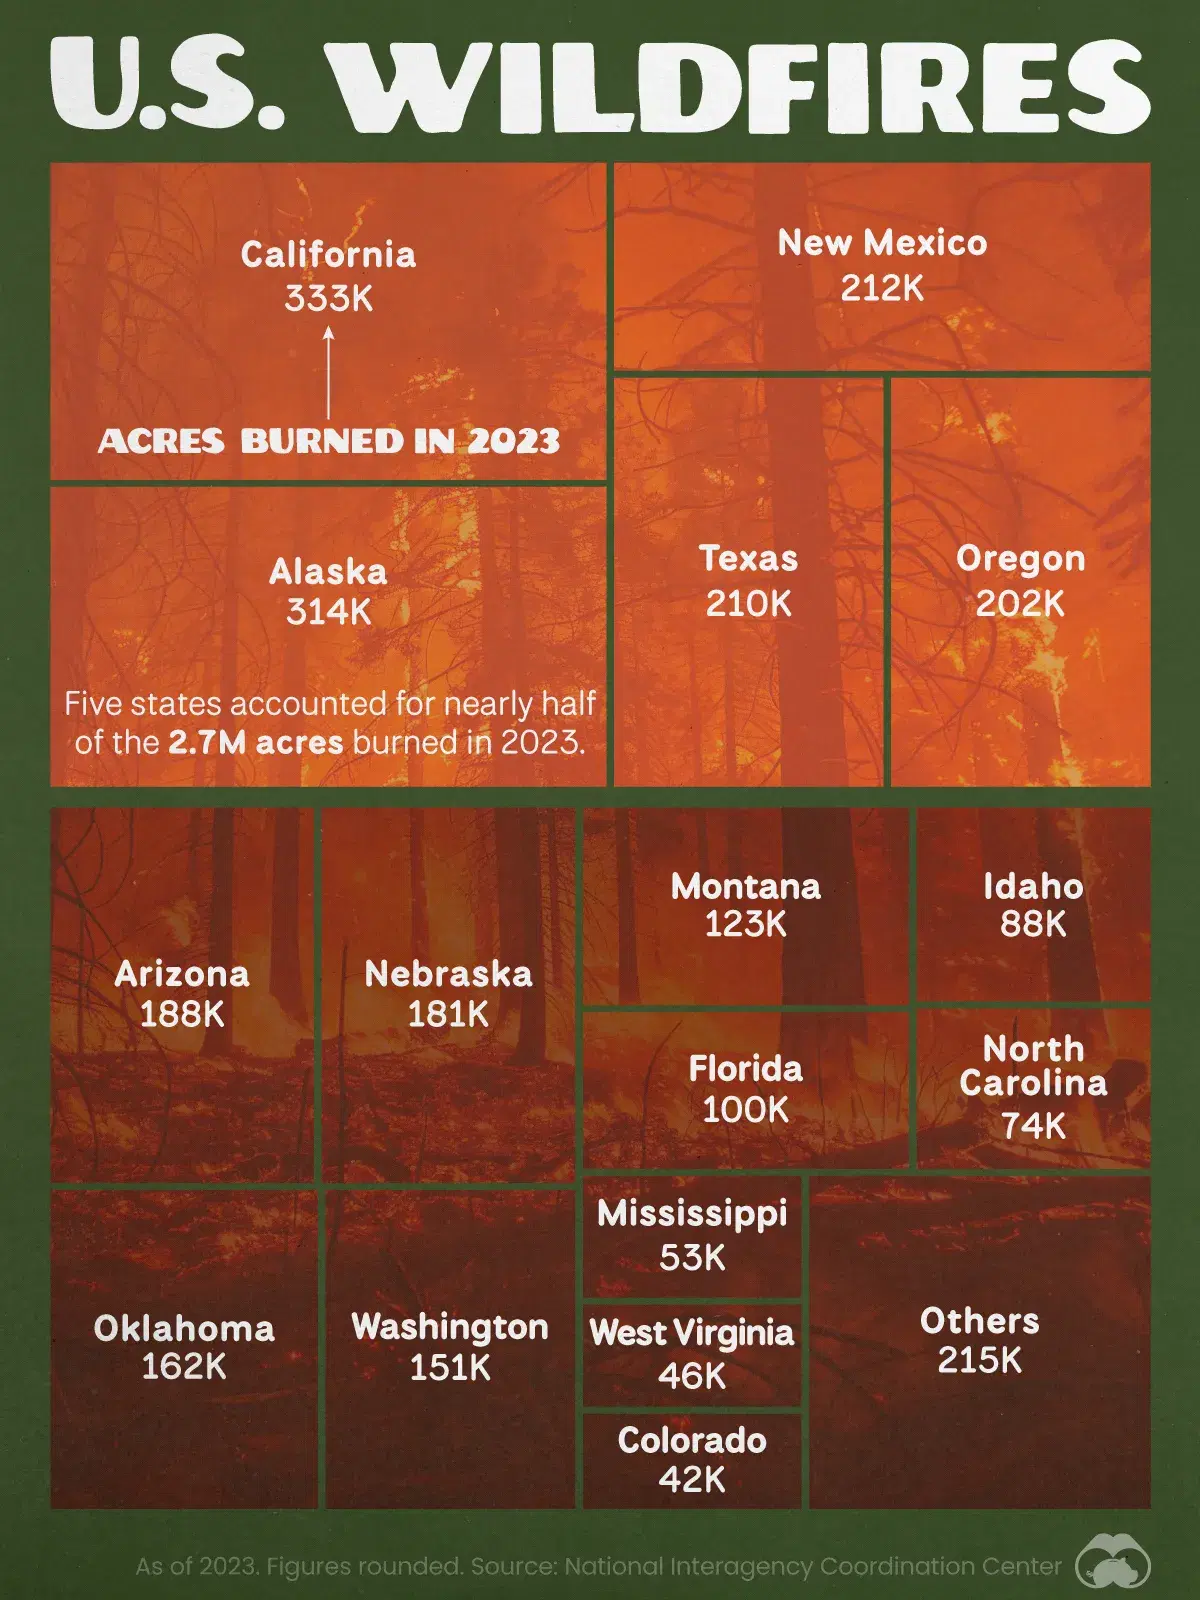 🔥 Californian & Alaskan Fires Accounted for 25% of Wildfire Area Burned in 2023